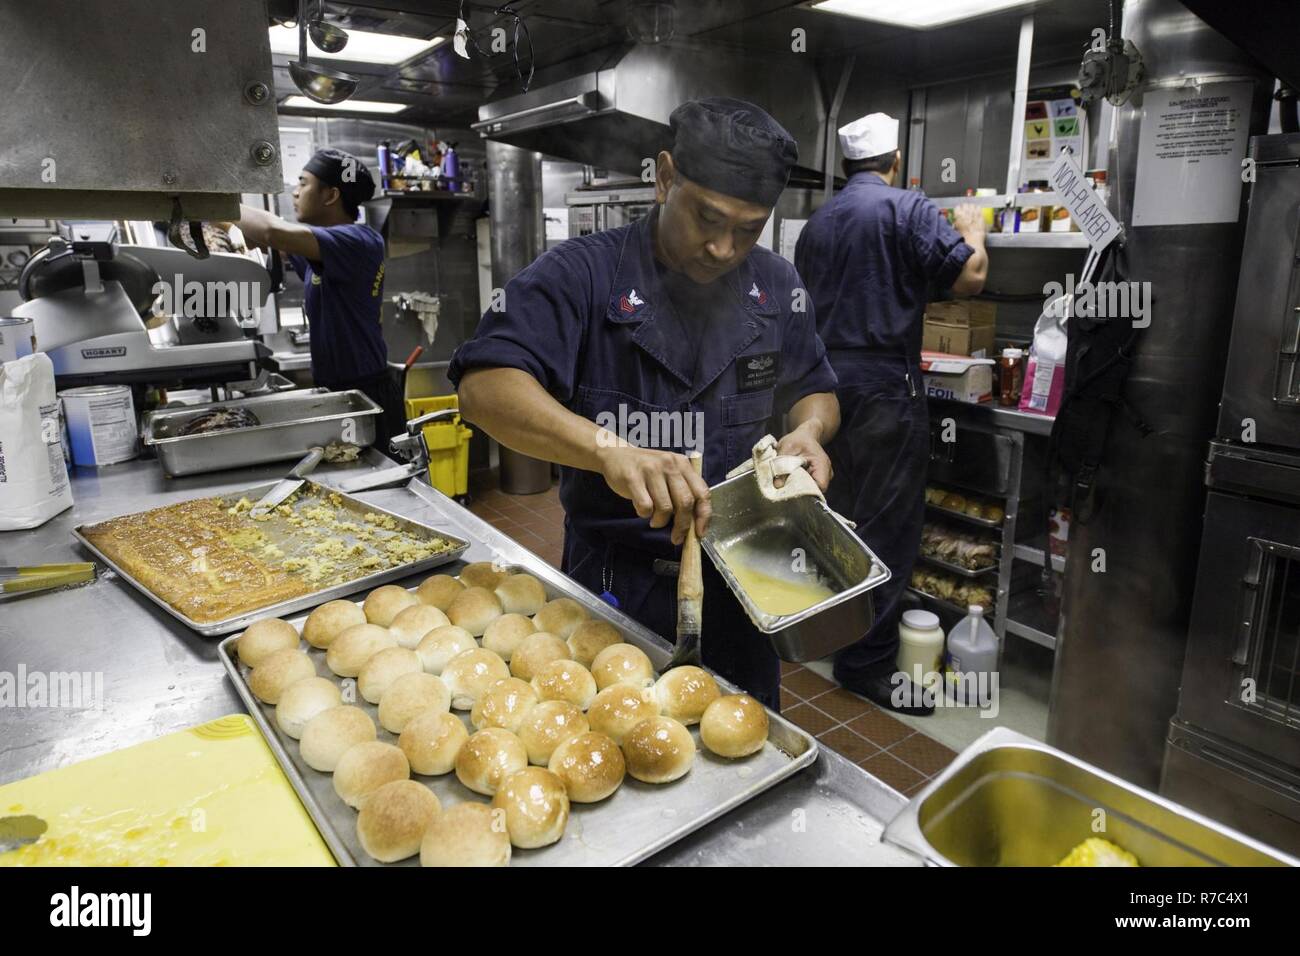 SOUTH CHINA SEA(May 14, 2017)   Jun Alejandrino, a native of the Philippines, prepares dinner rolls in the galley aboard the Arleigh Burke-class guided-missile destroyer USS Dewey (DDG 105).  Dewey is part of the Sterett-Dewey Surface Action Group and is the third deploying group operating under the command and control construct called 3rd Fleet Forward.  The U.S. 3rd Fleet operating forward offers additional options to the Pacific Fleet commander by leveraging the capabilities of 3rd and 7th Fleets. Stock Photo